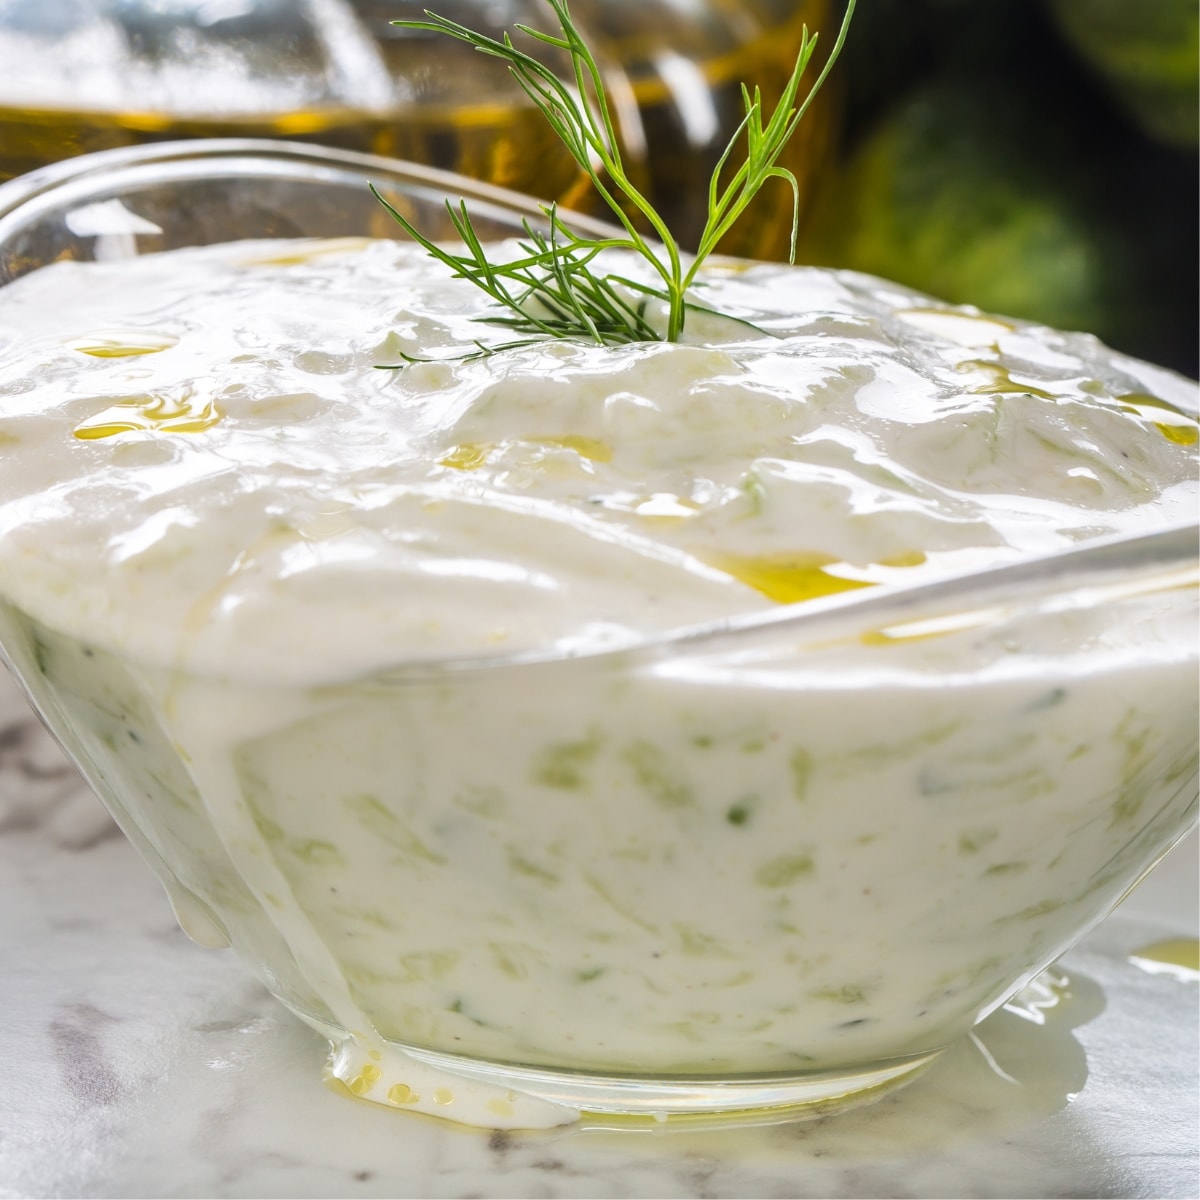 Tzatziki sauce on a glass boat shape bowl garnished with fresh dill leaves on top.